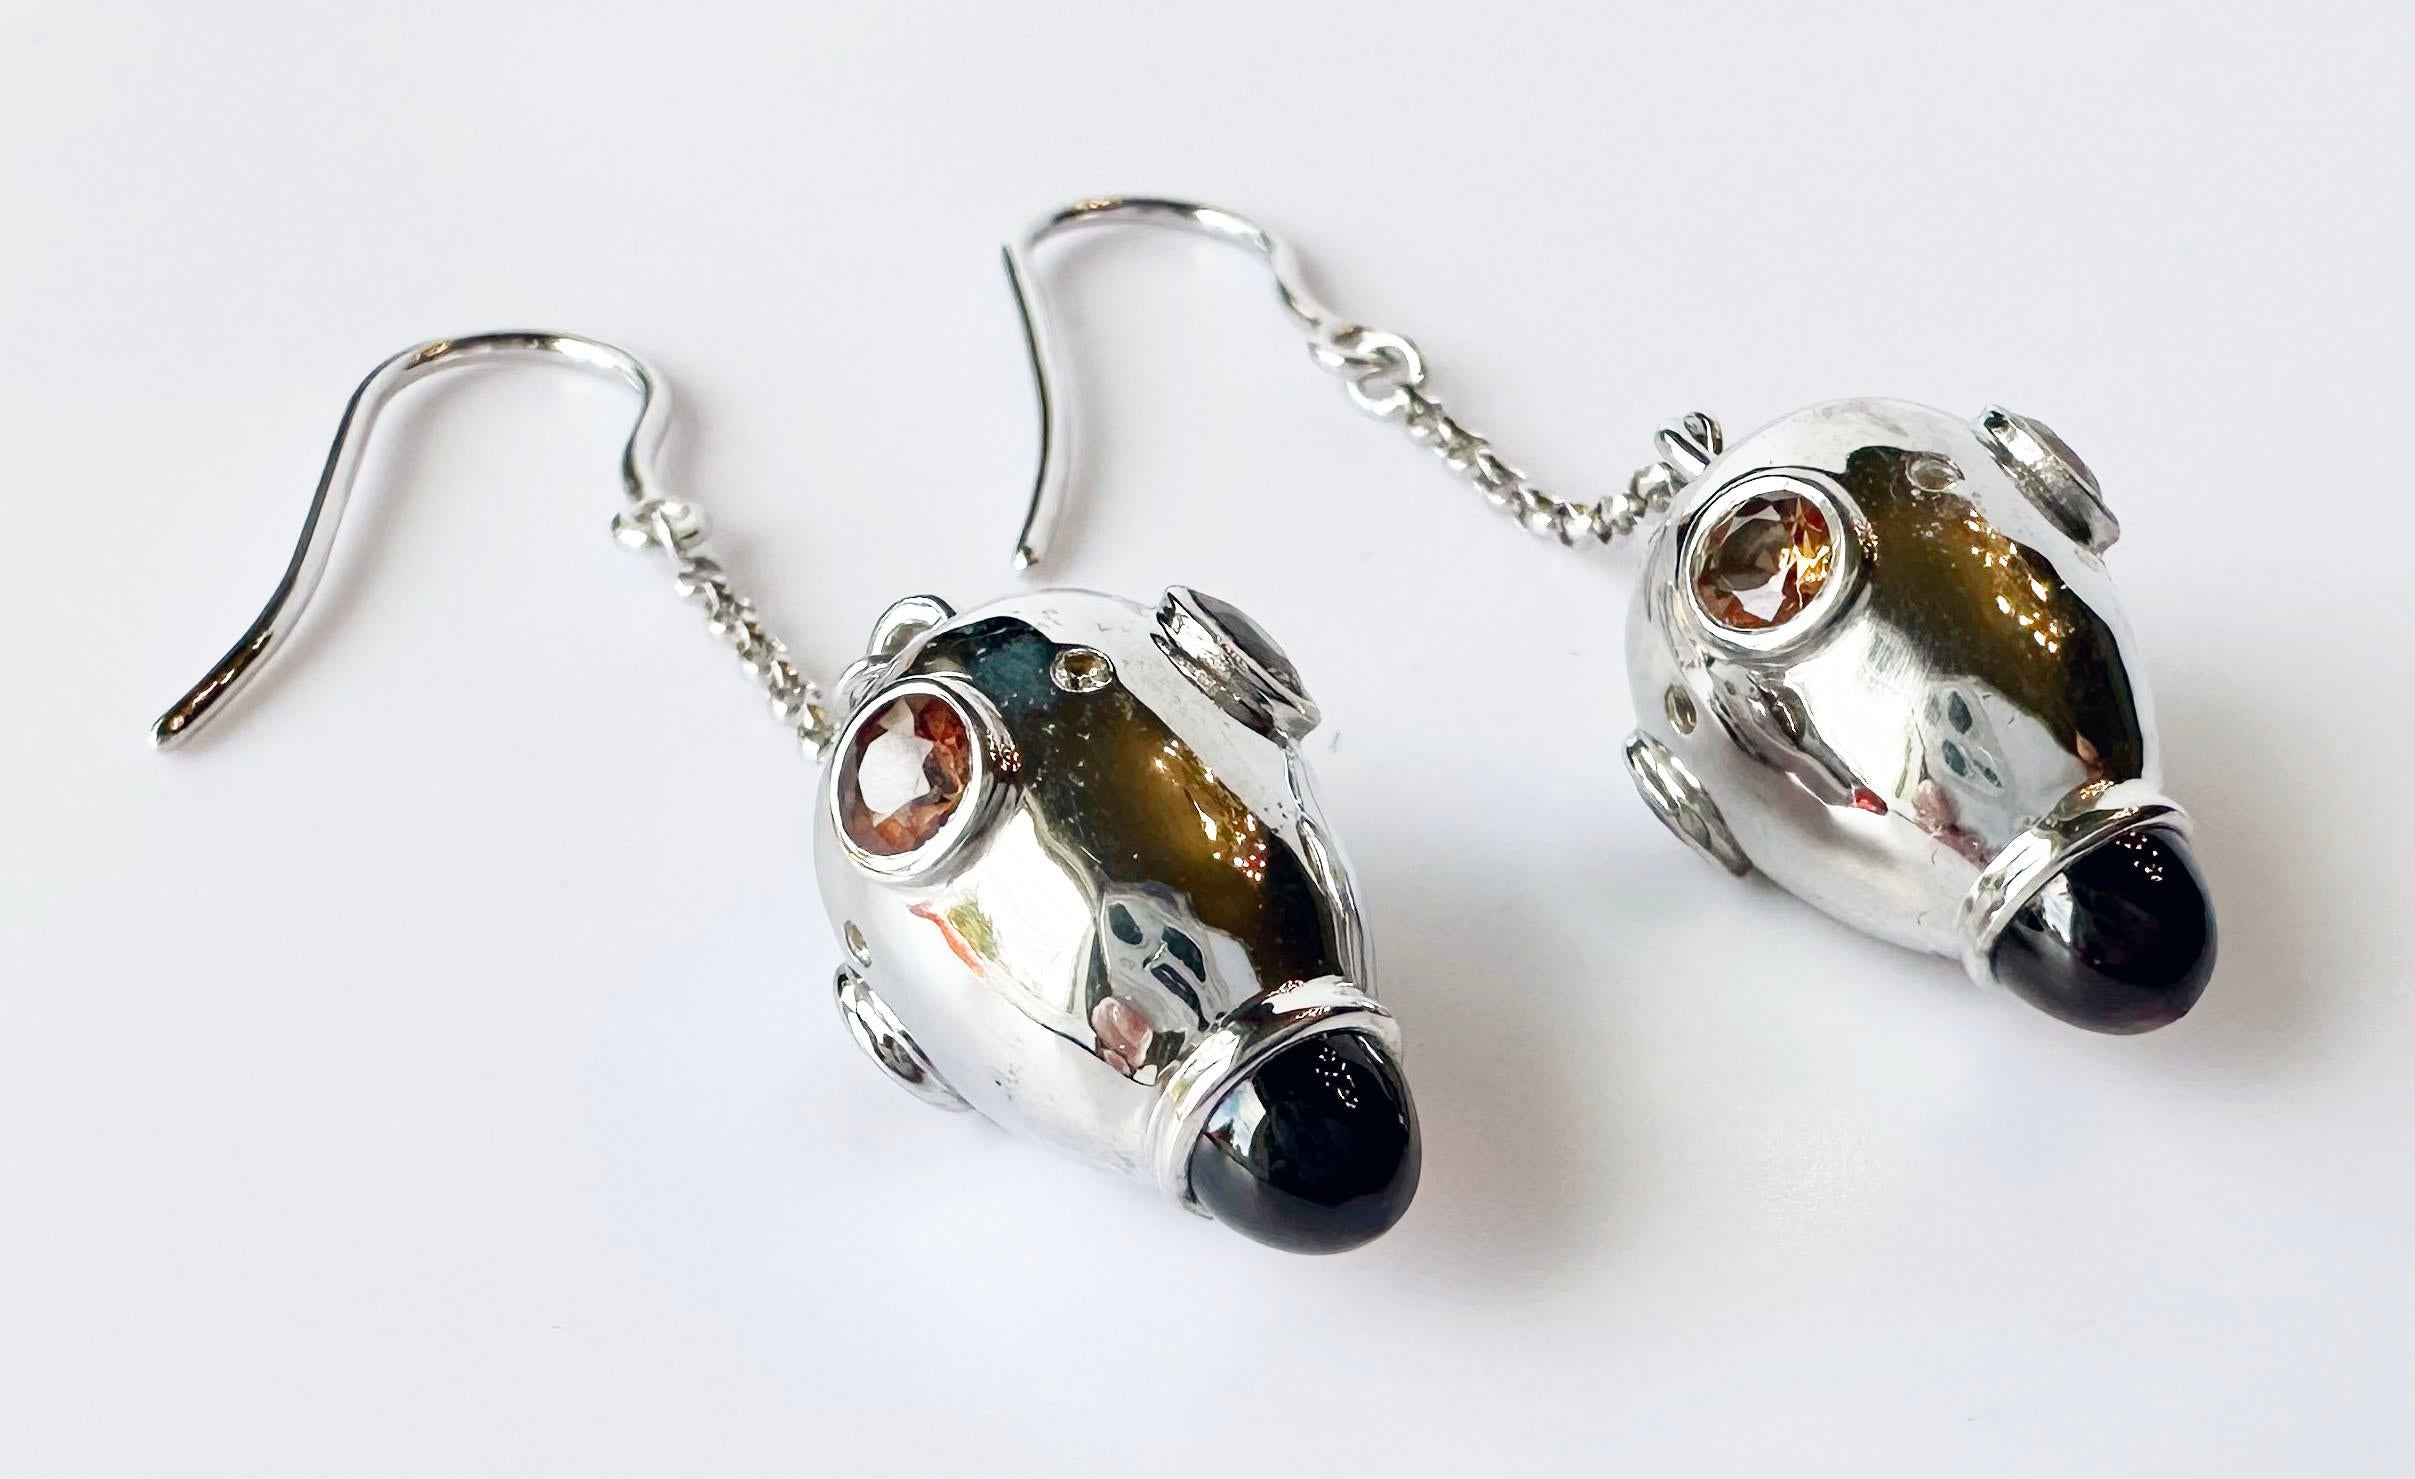 Silver Drop Earrings, Set with Pyrope Garnet Cabochons, Orange Sapphires and Diamonds. These spectacular dangles will be sure to catch attention as they are unique and one of a kind.

Originally from San Diego, California, Kary Adam lived in the